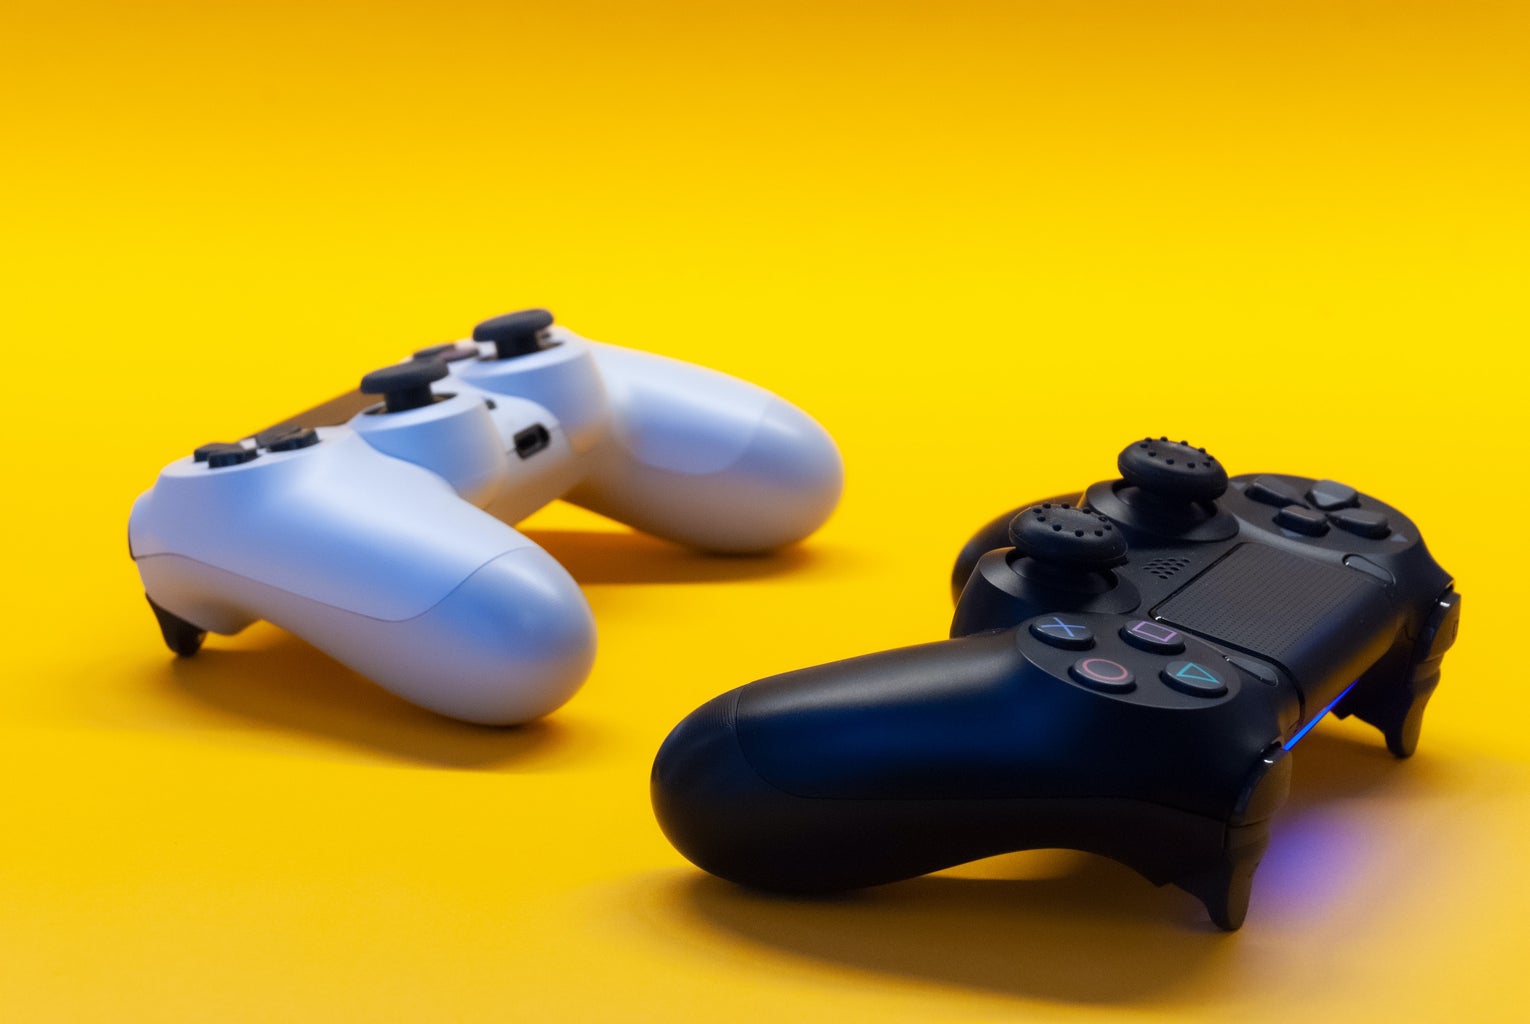 Black and white controllers, gaming